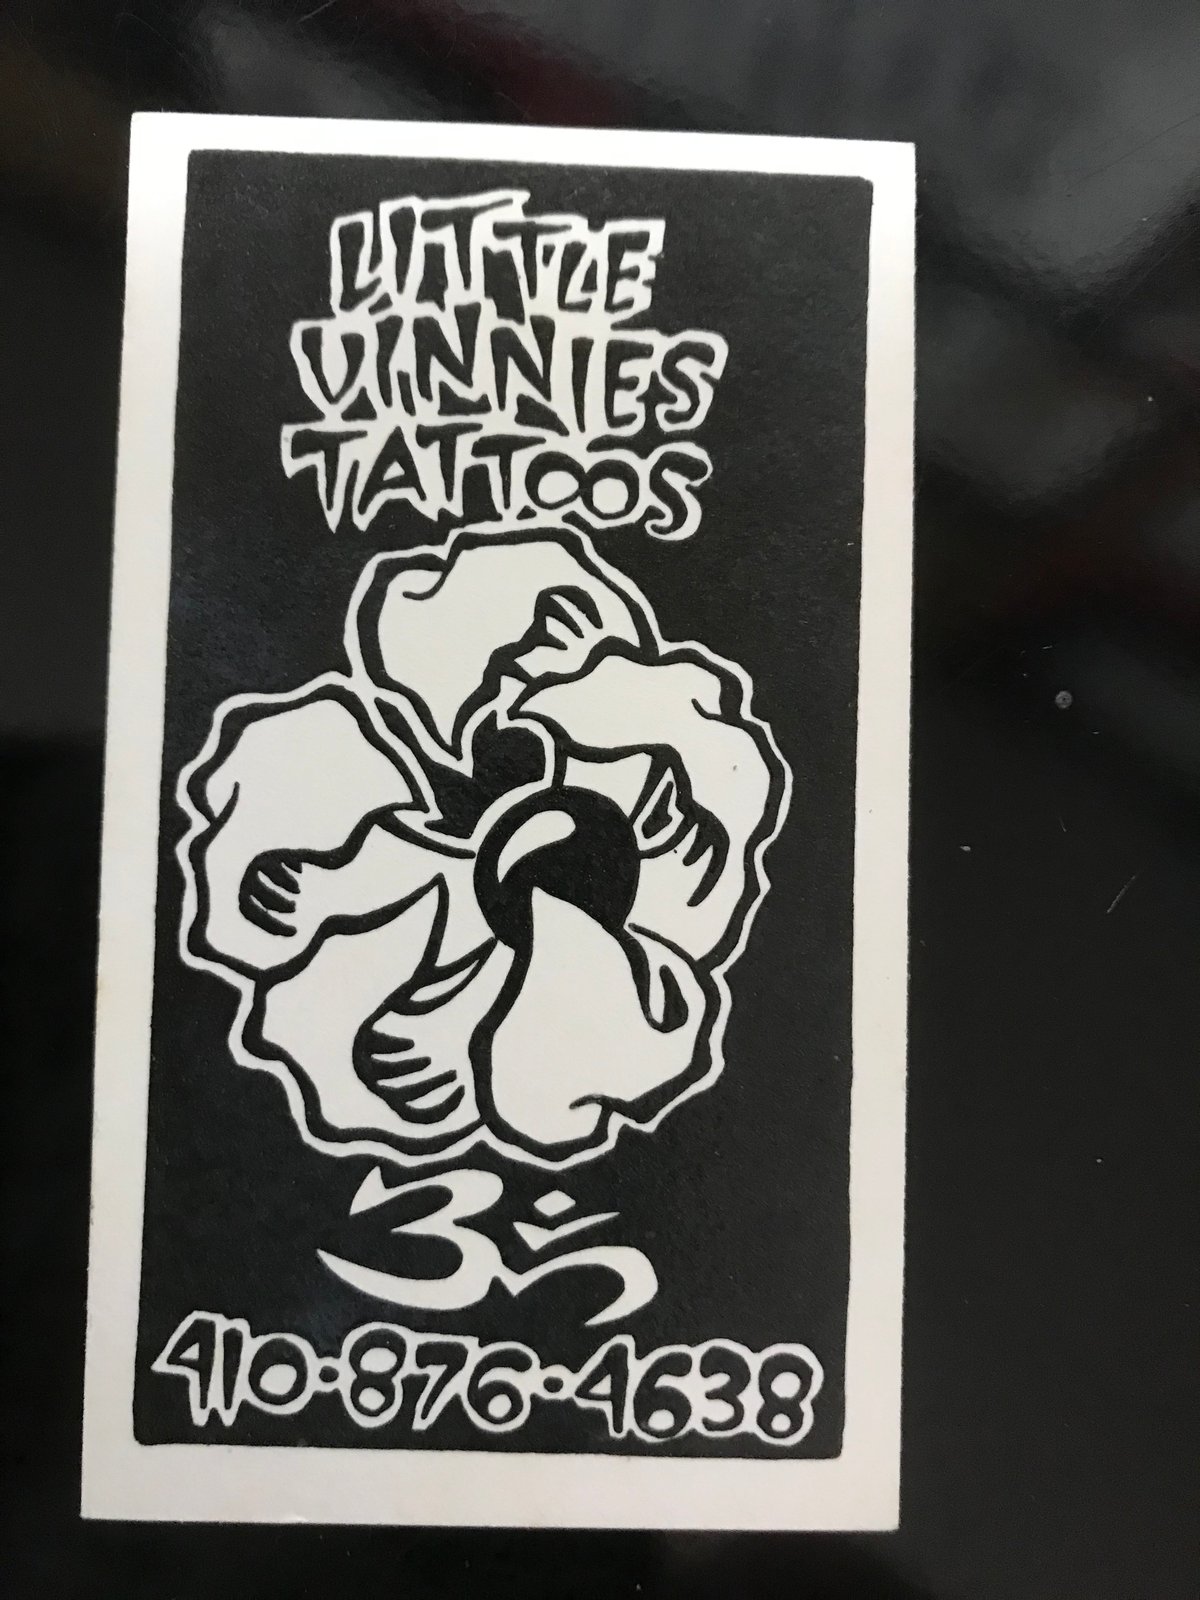 Little Vinnies West Side Tattoos 8034 Liberty Rd Windsor Mill MD Tattoo  parlor  MapQuest